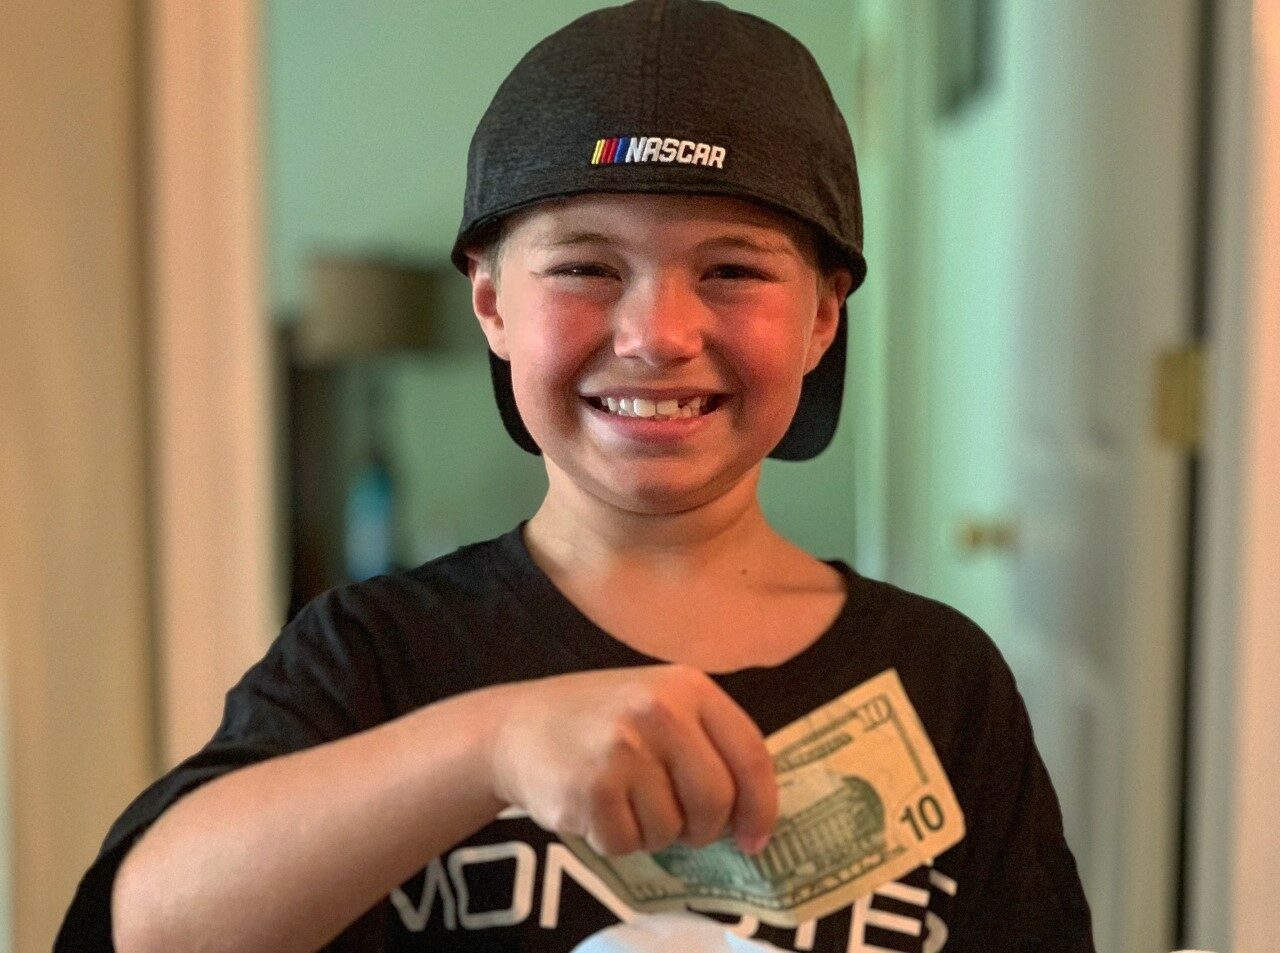 Certainly, little Michael Palmer can't wait to use his 2020 NASCAR Fund. (Photo Credit: Michael Palmer/TPF)